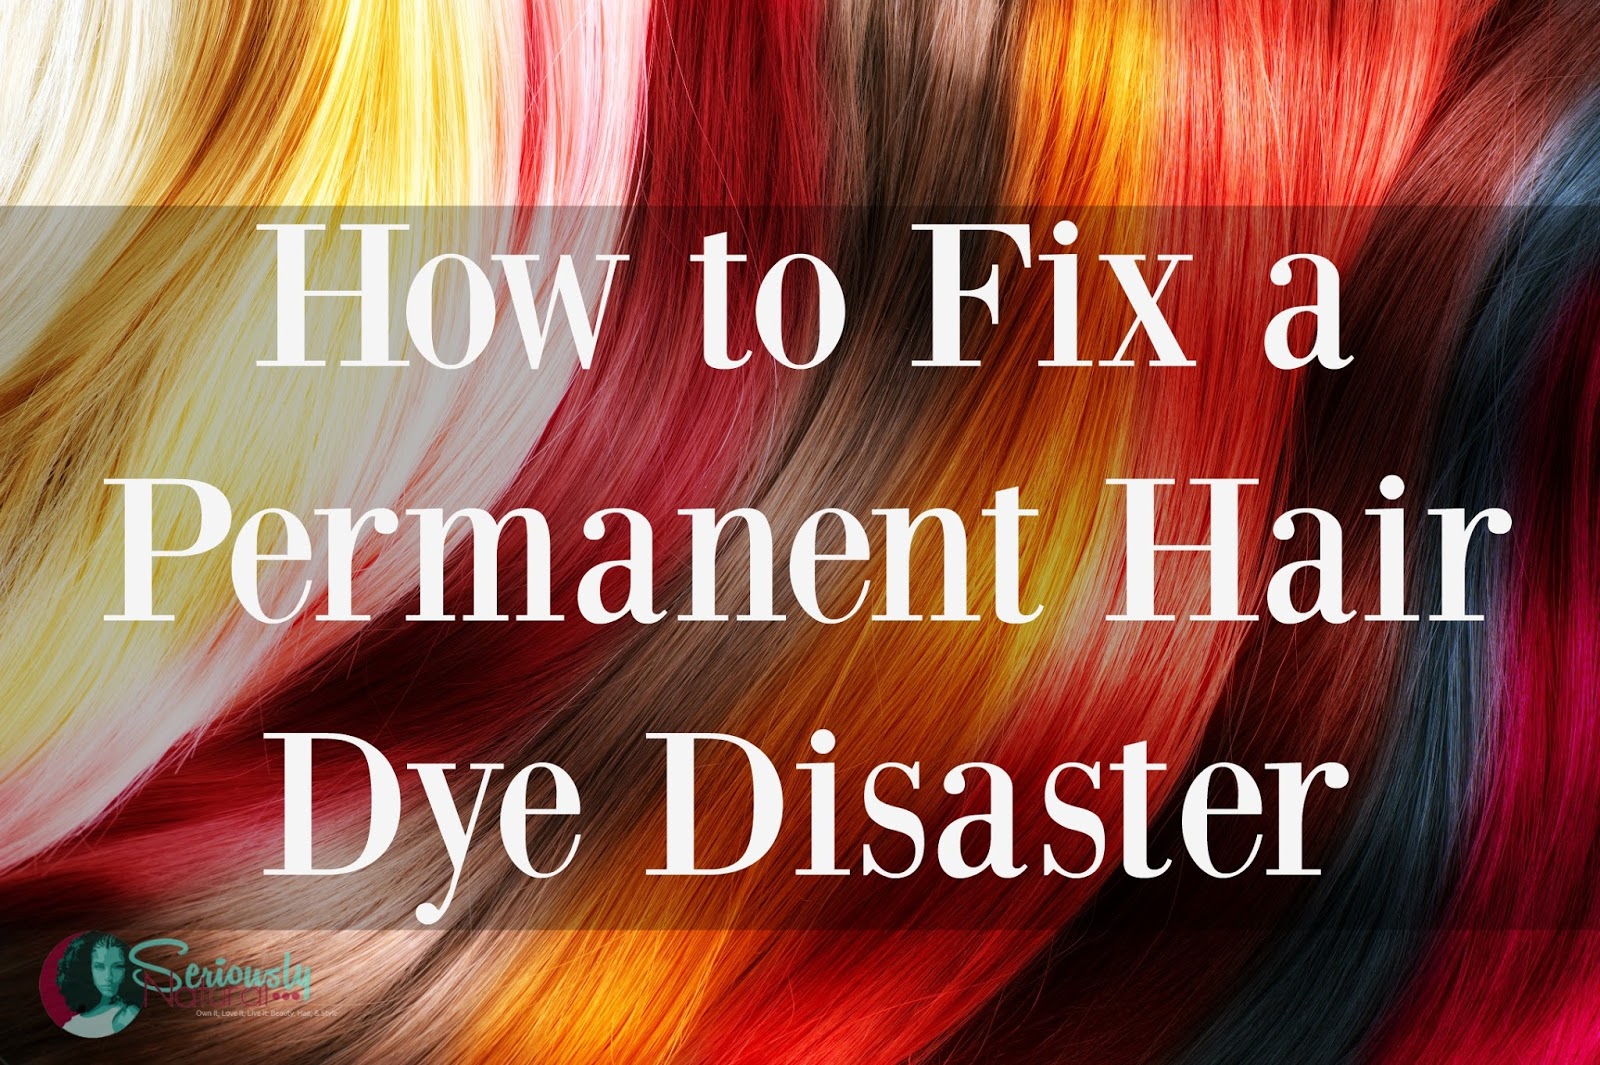 How to Fix a Permanent Hair Dye Disaster - Seriously Natural